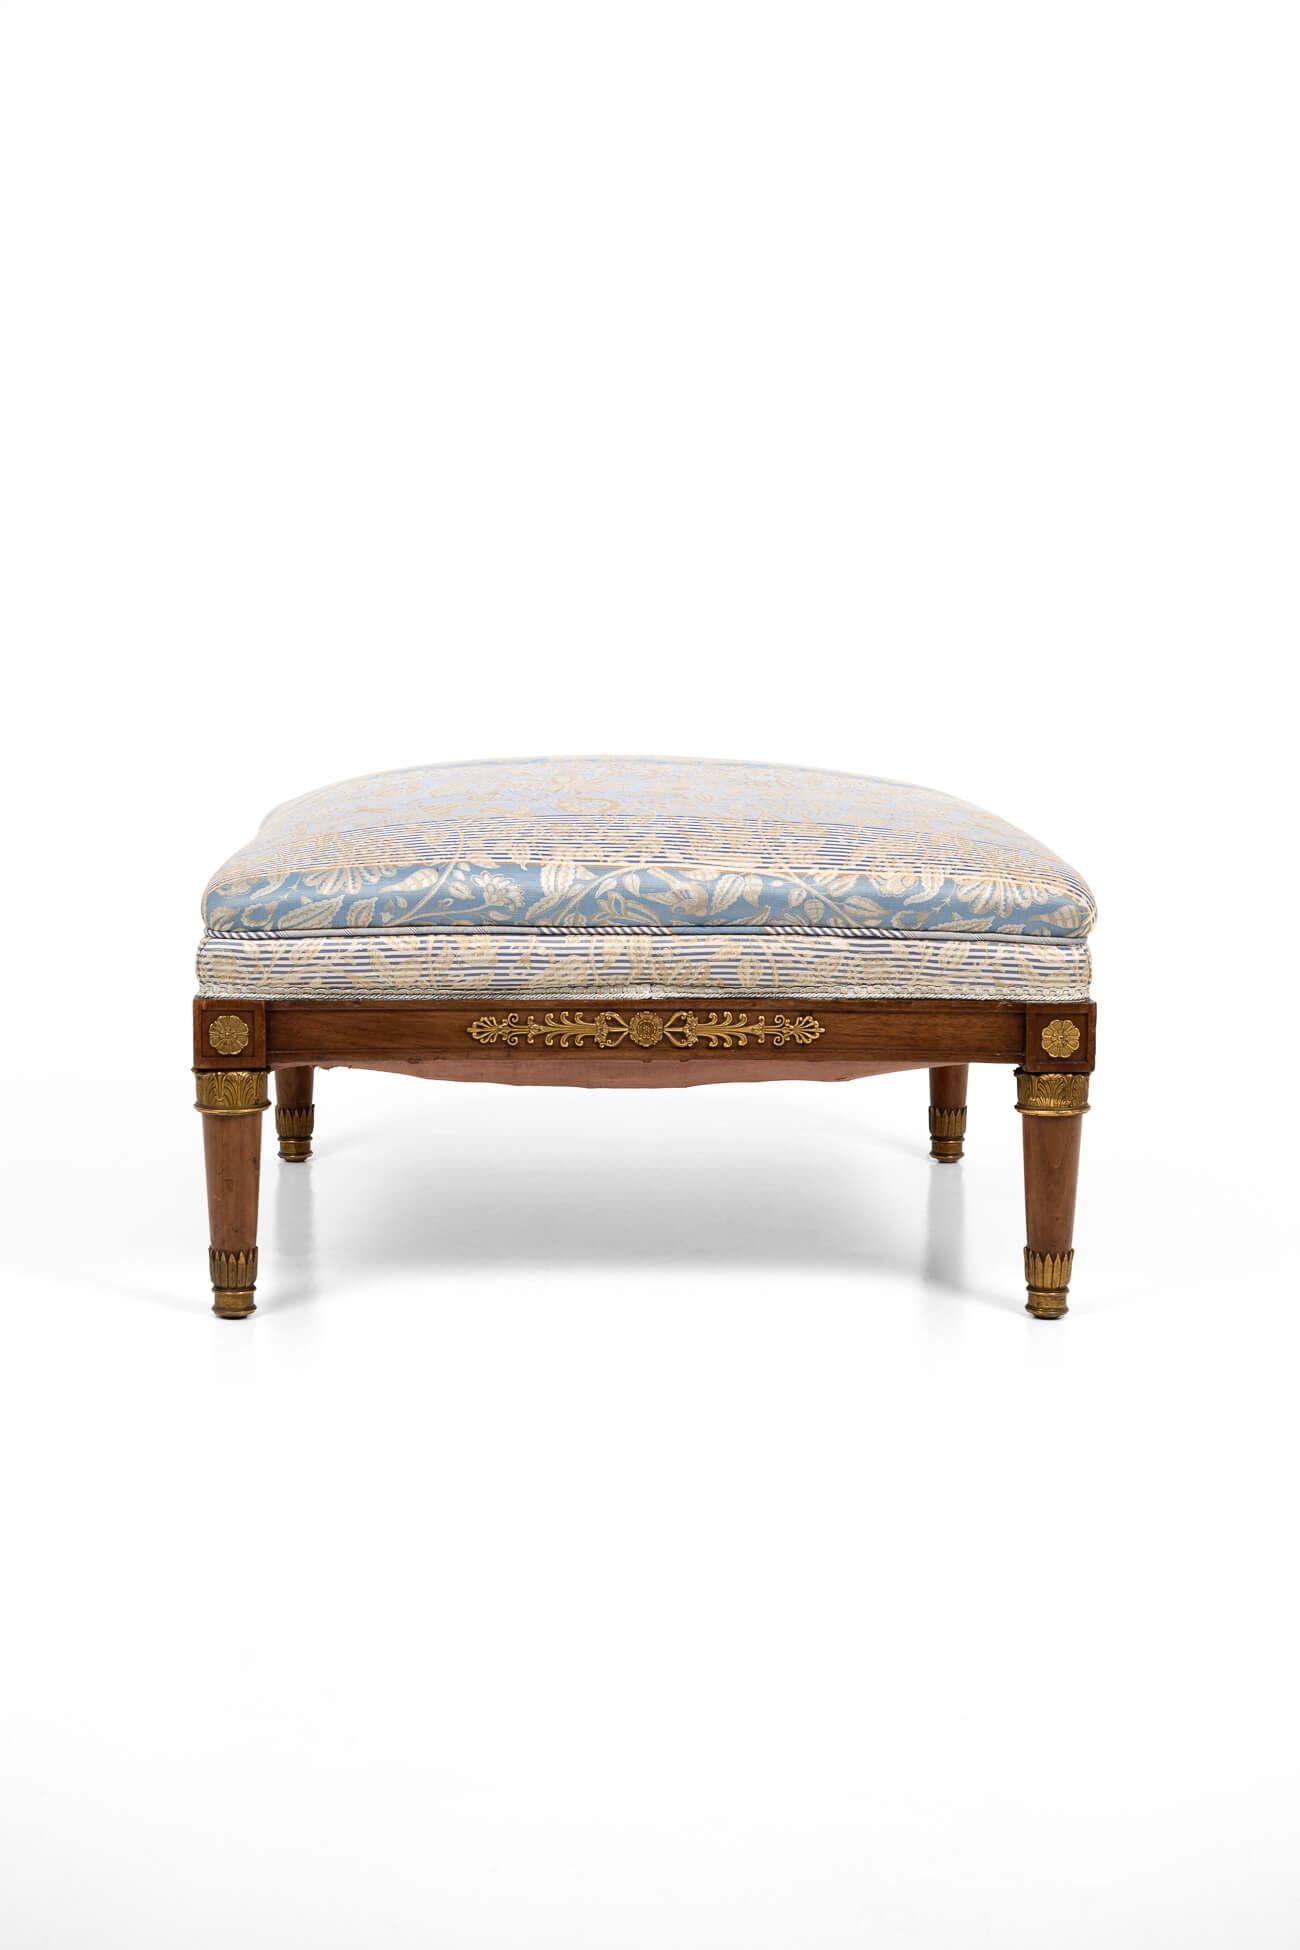 A large and simply stunning 19th Century French footstool. Made in mahogany with delicate Ormolu mounts to legs ending in square tapering supports. The gently bowed sides are topped with a finely patterned Damask fabric. 
France, circa